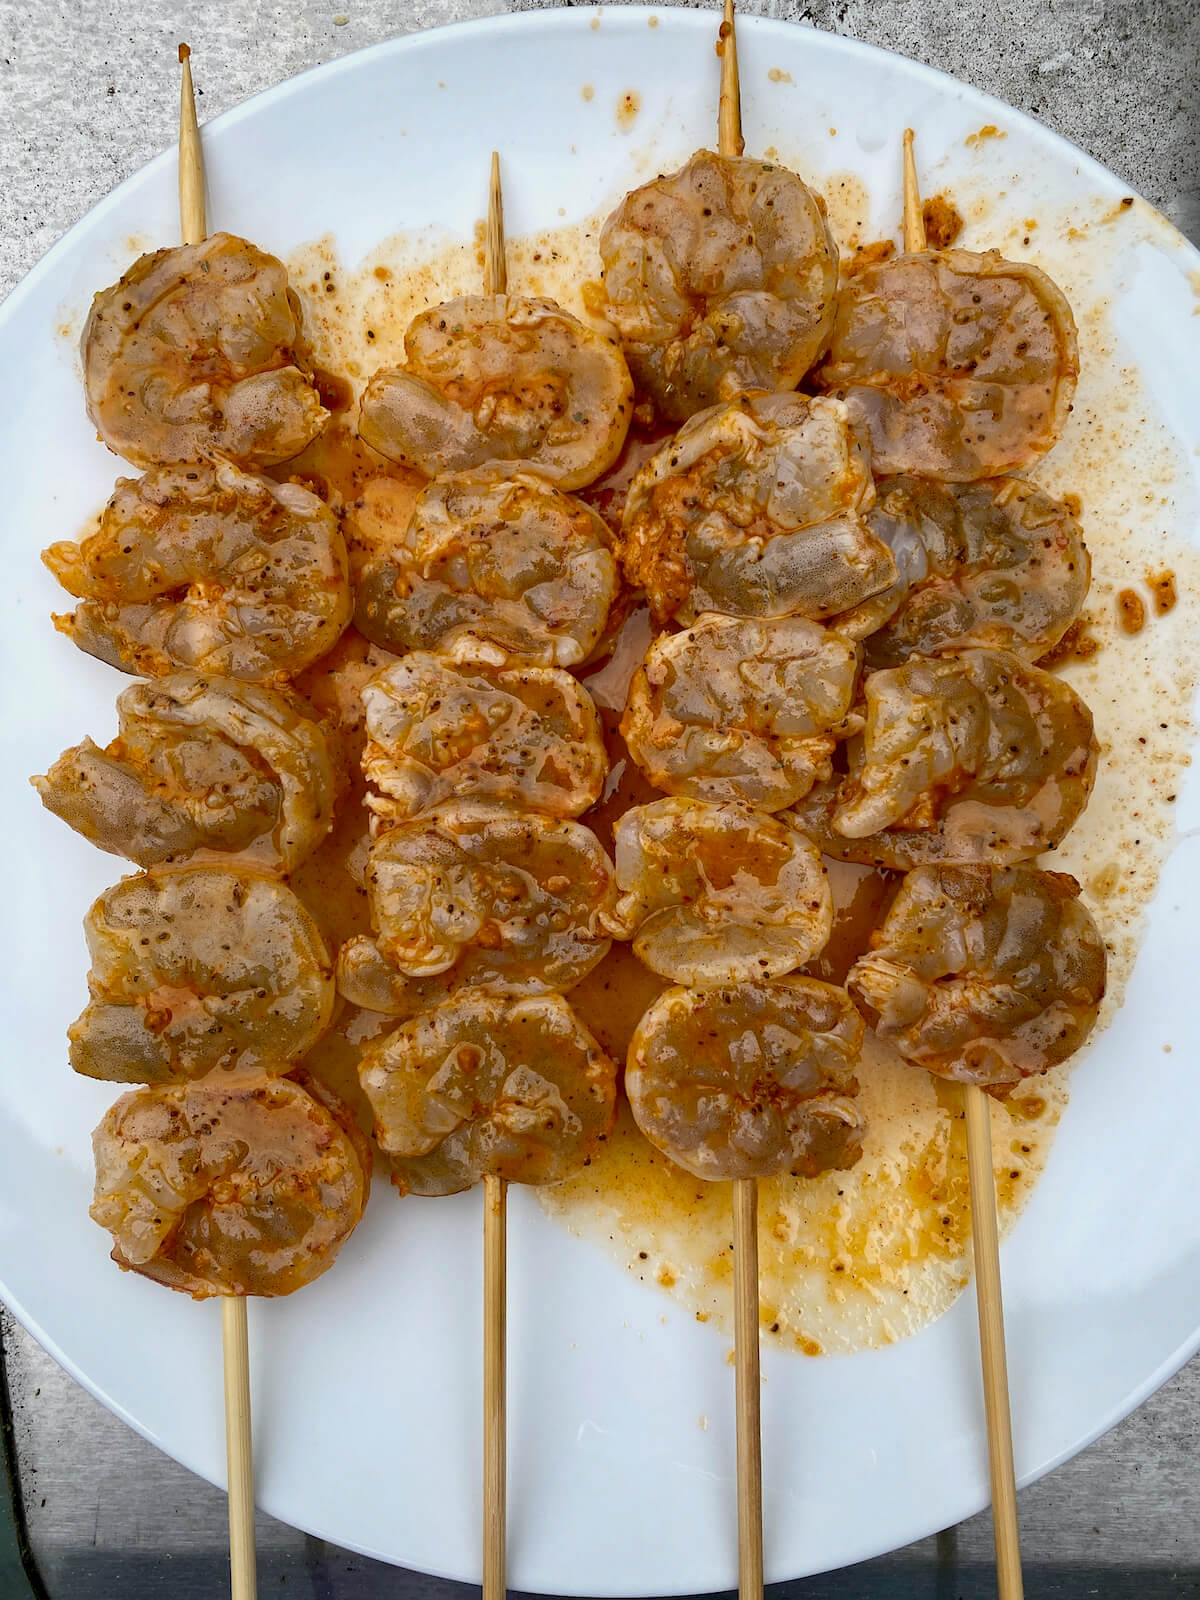 Four skewers of marinated raw shrimp on a white plate.